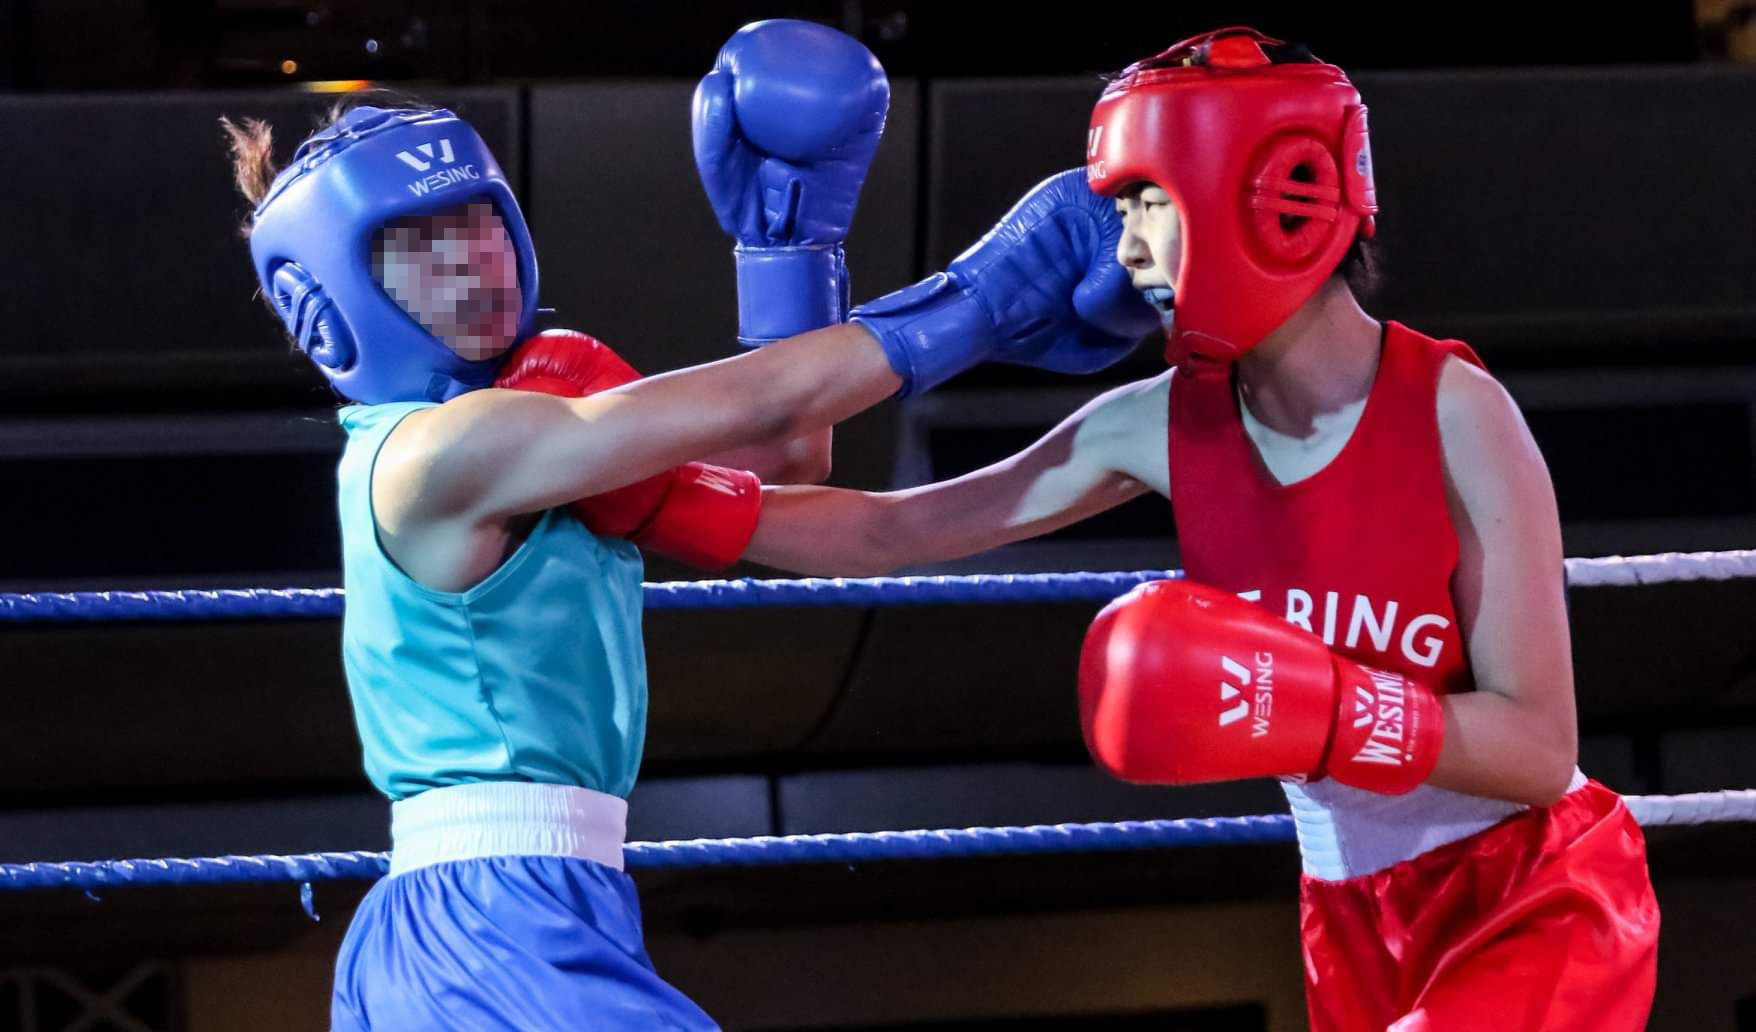 SGT2 Ching Yen (right) in the boxing ring with an opponent.